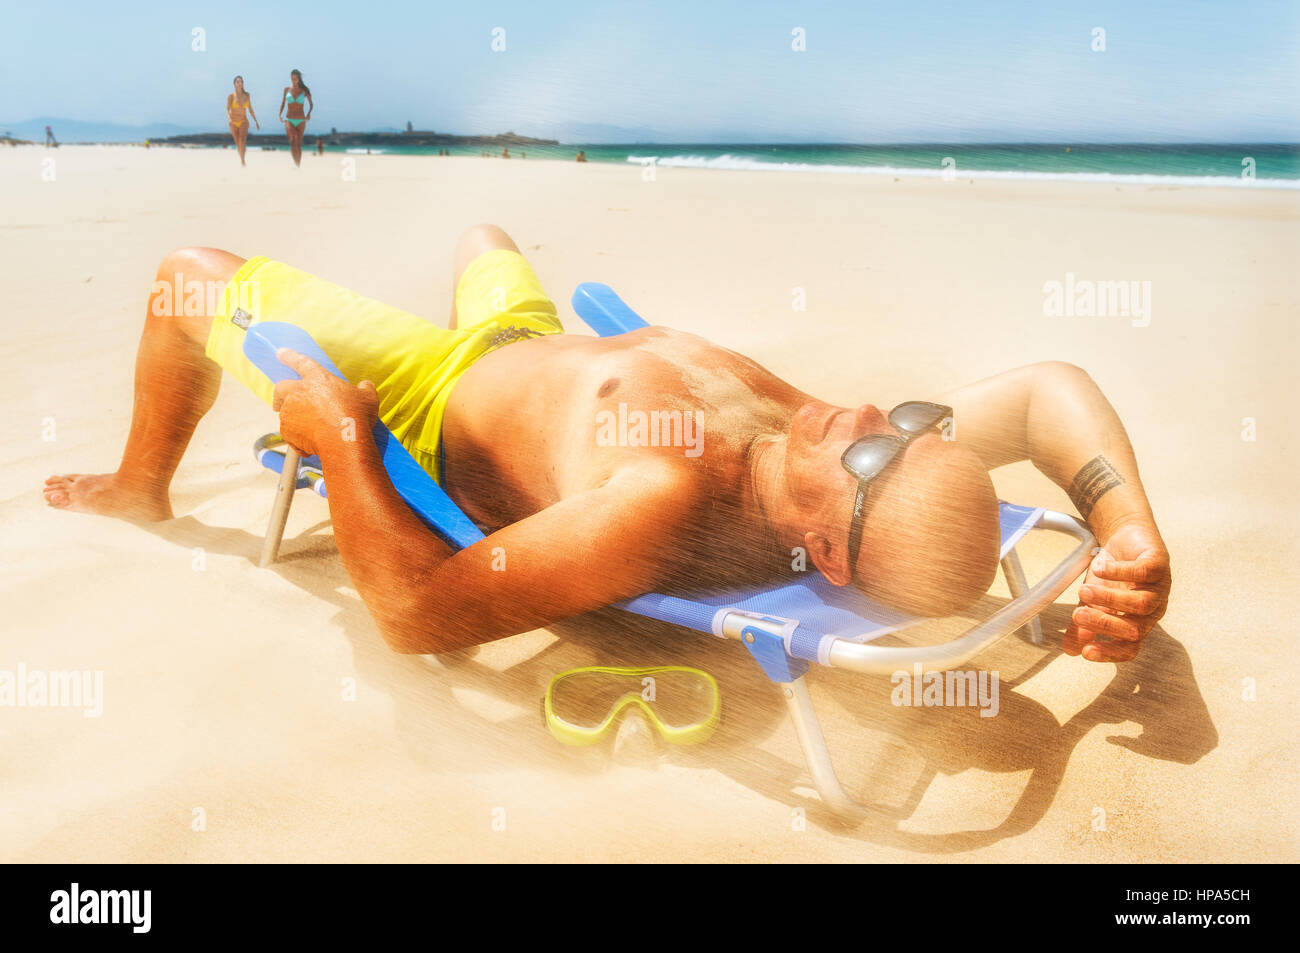 Man at the beach on a windy day. Stock Photo